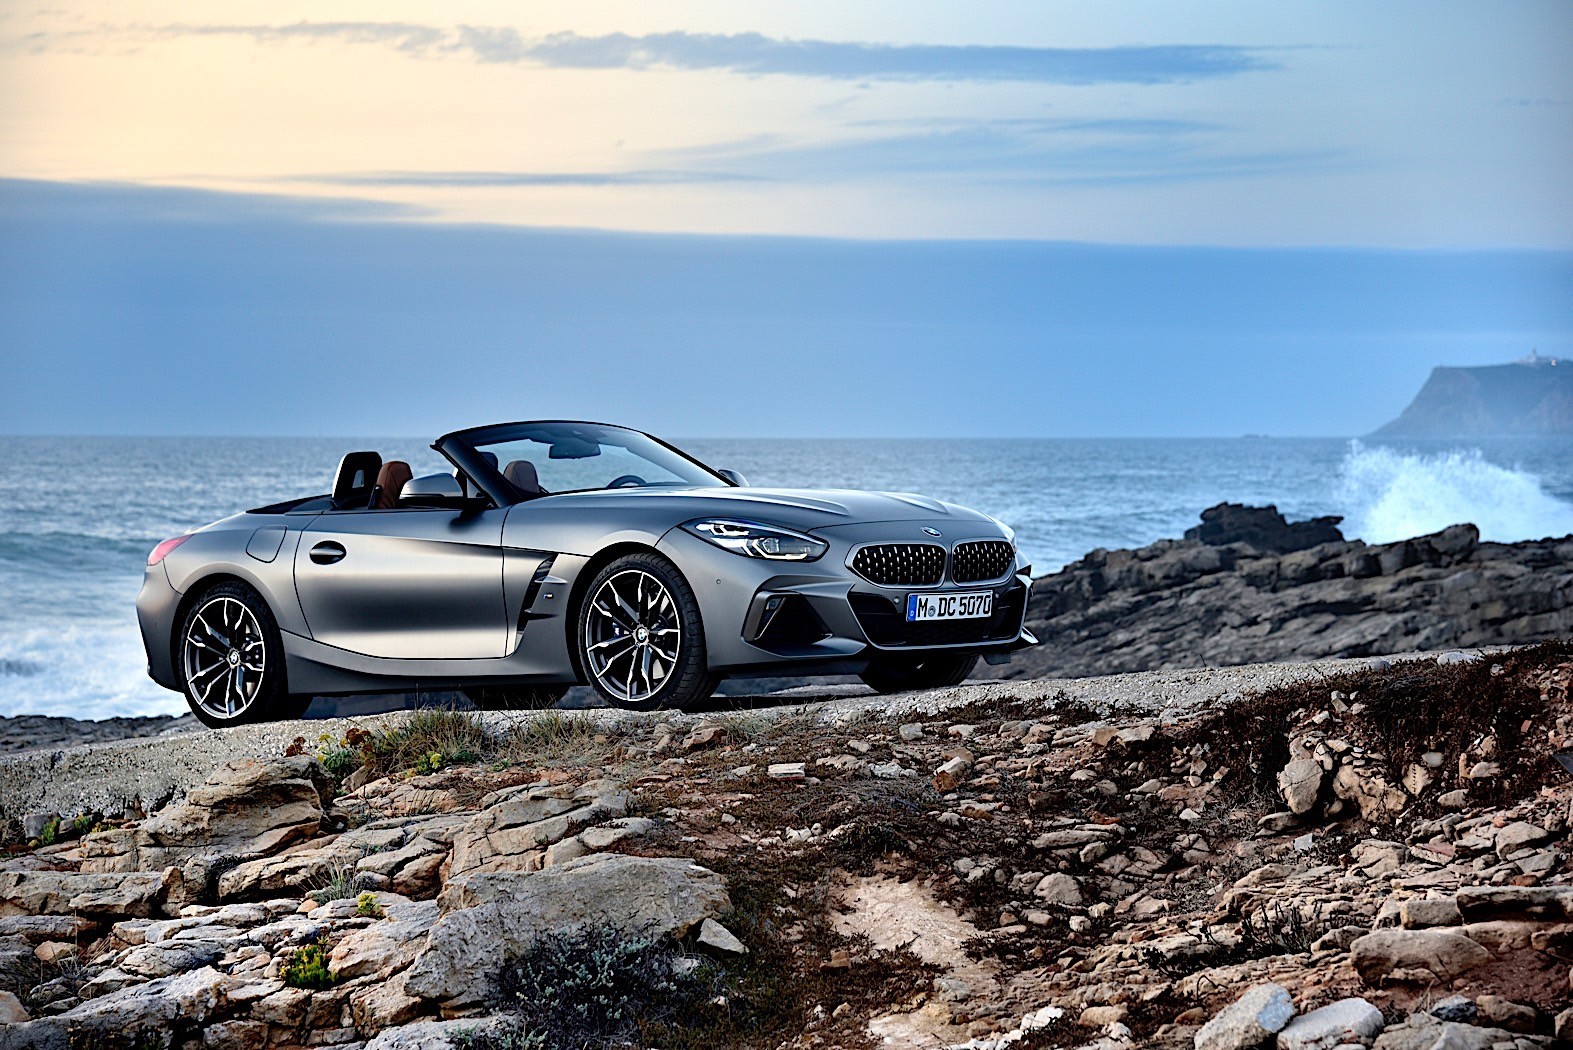 2020 BMW Z4 Roadster Shows Stunning Details in New Photo ...